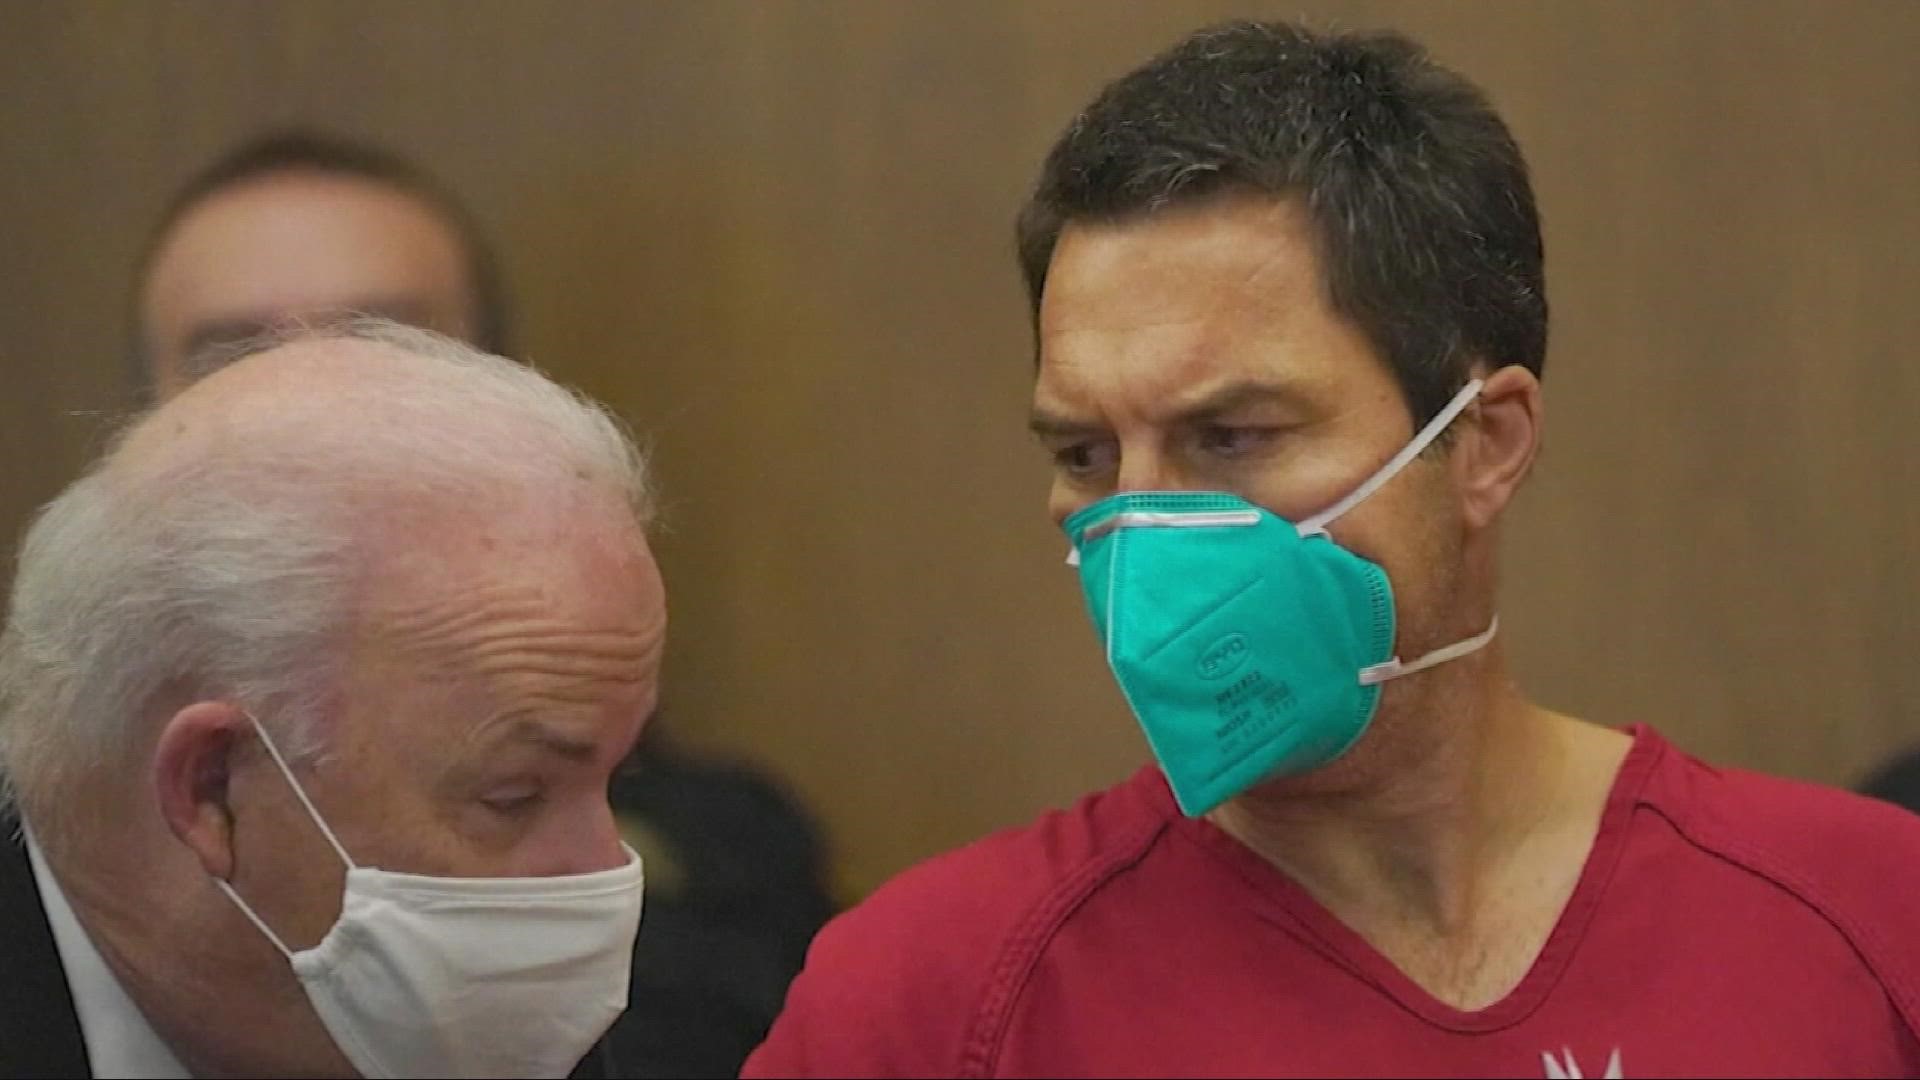 Scott Peterson's legal team is hoping to get the convicted murderer's case re-examined over claims a juror lied about being involved in a domestic violence case.